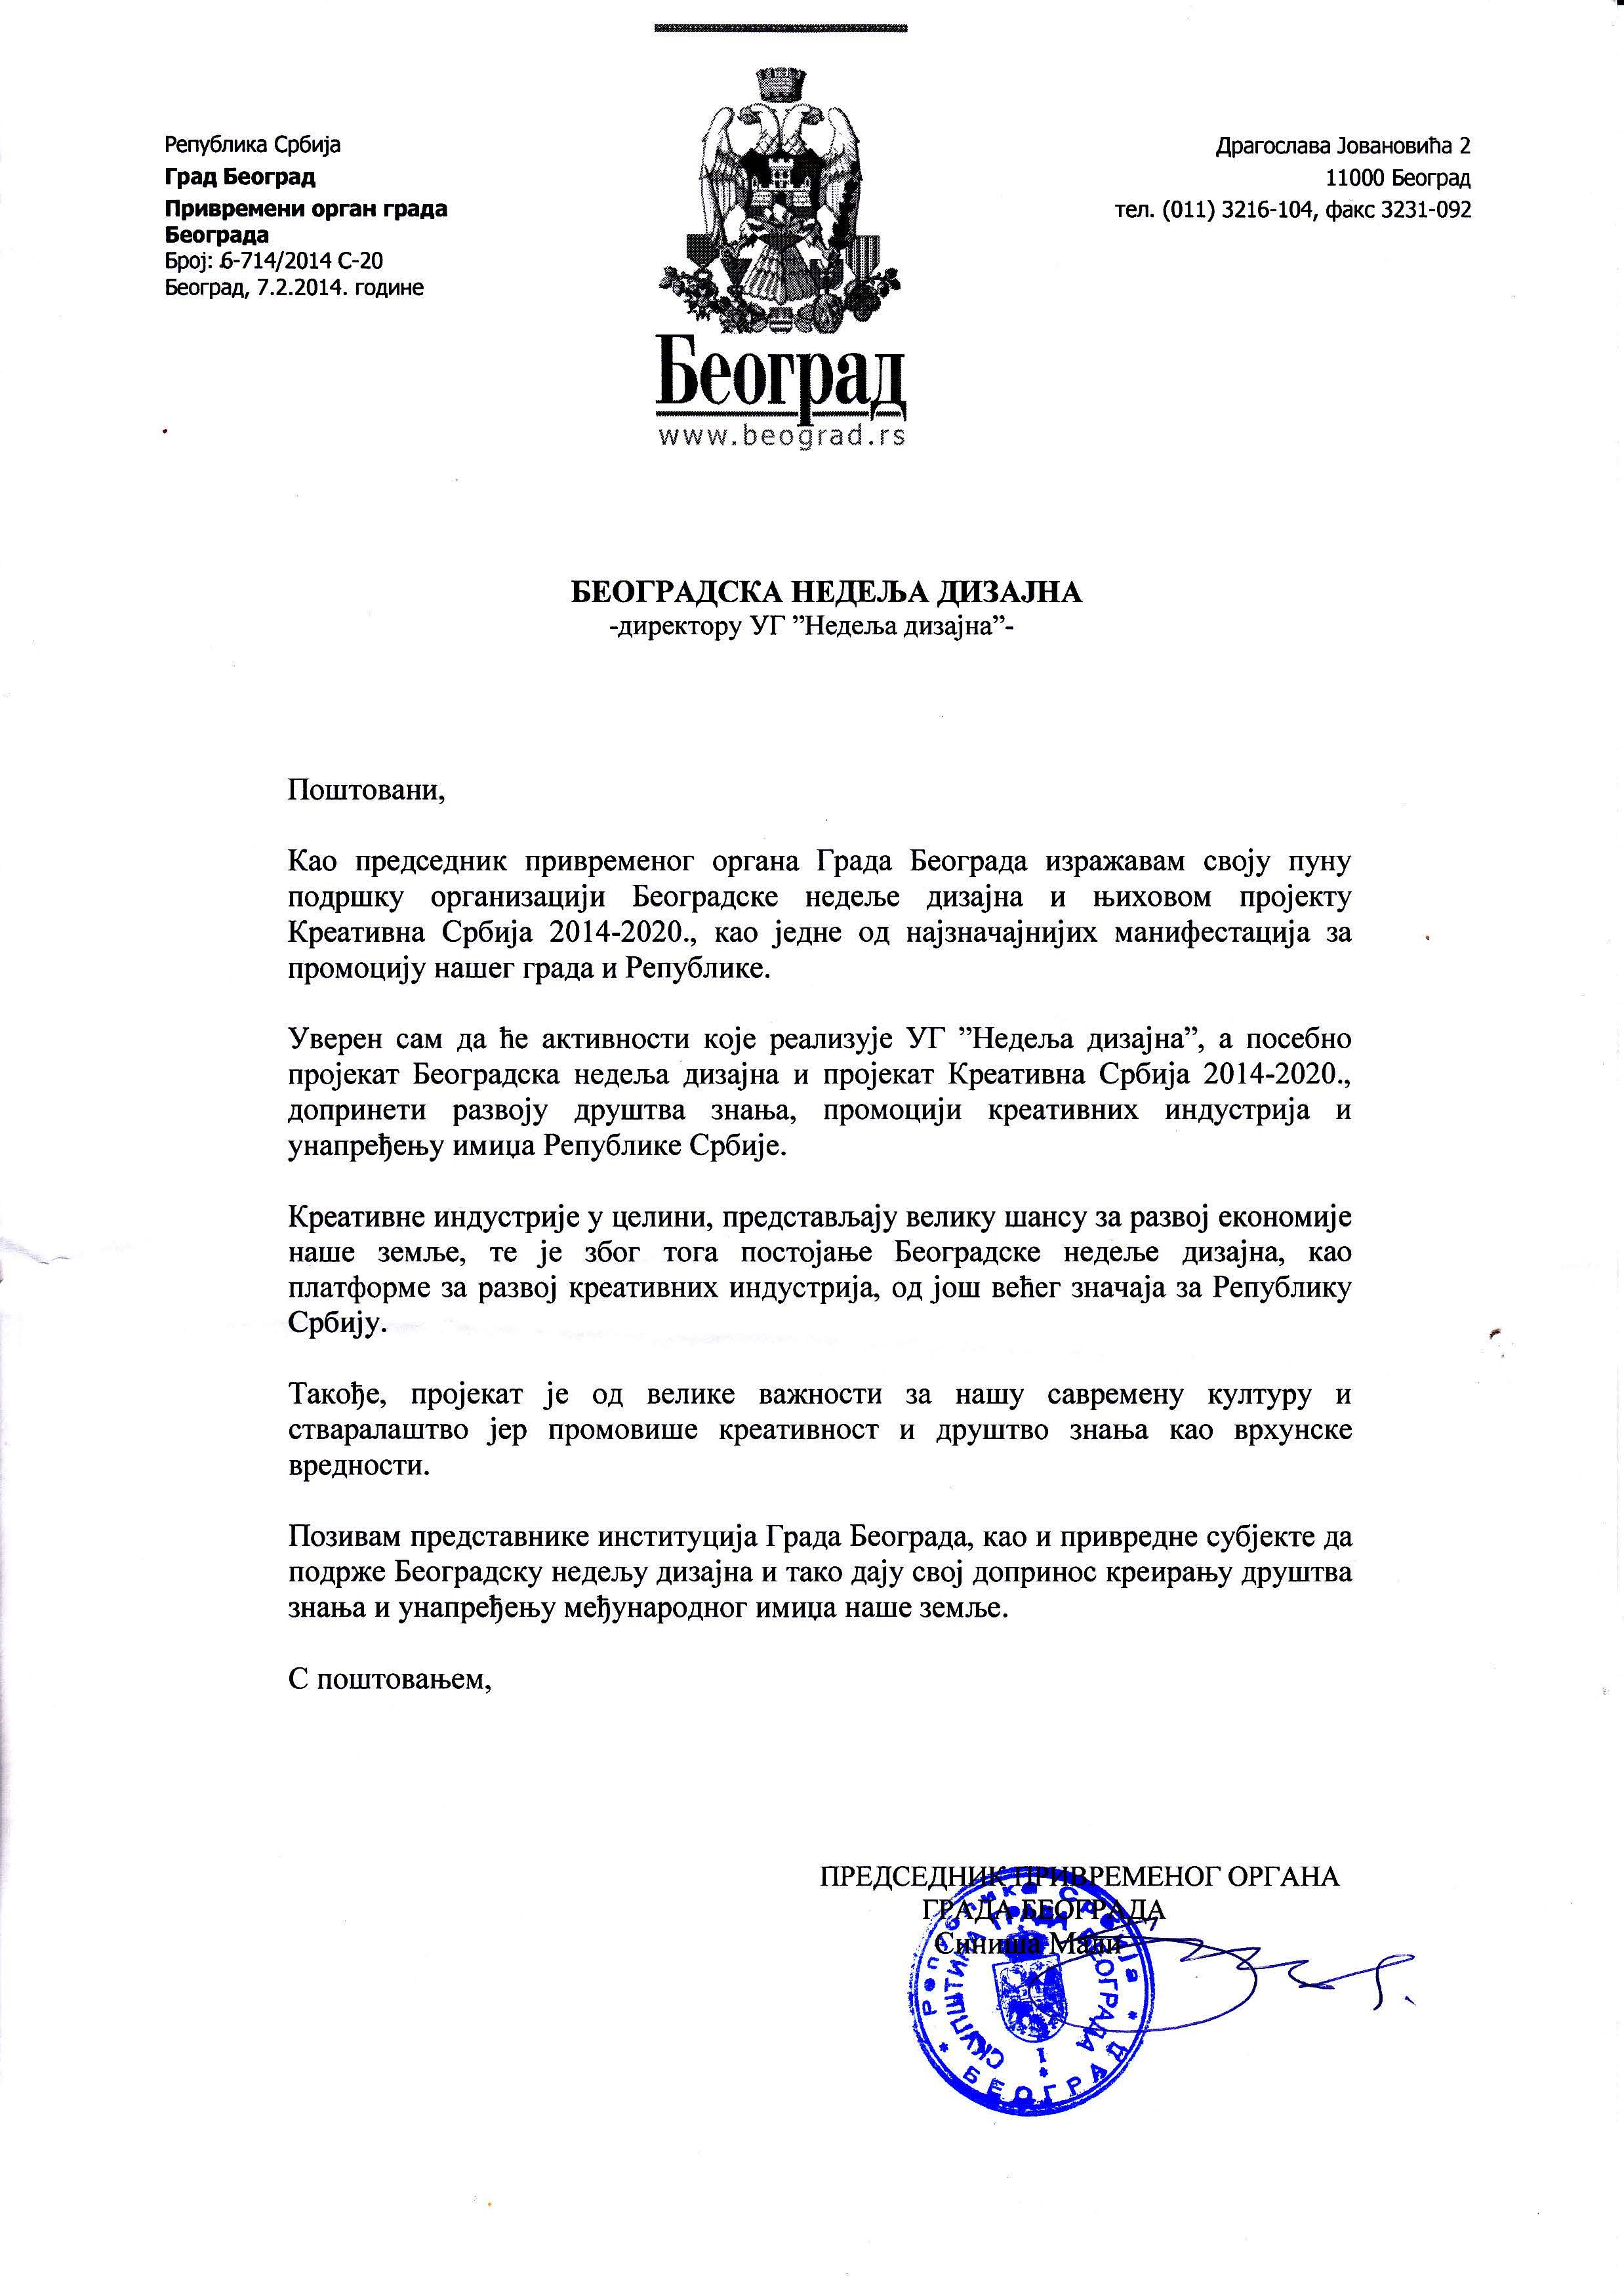 LETTER OF SUPPORT FROM THE CITY OF BELGRADE